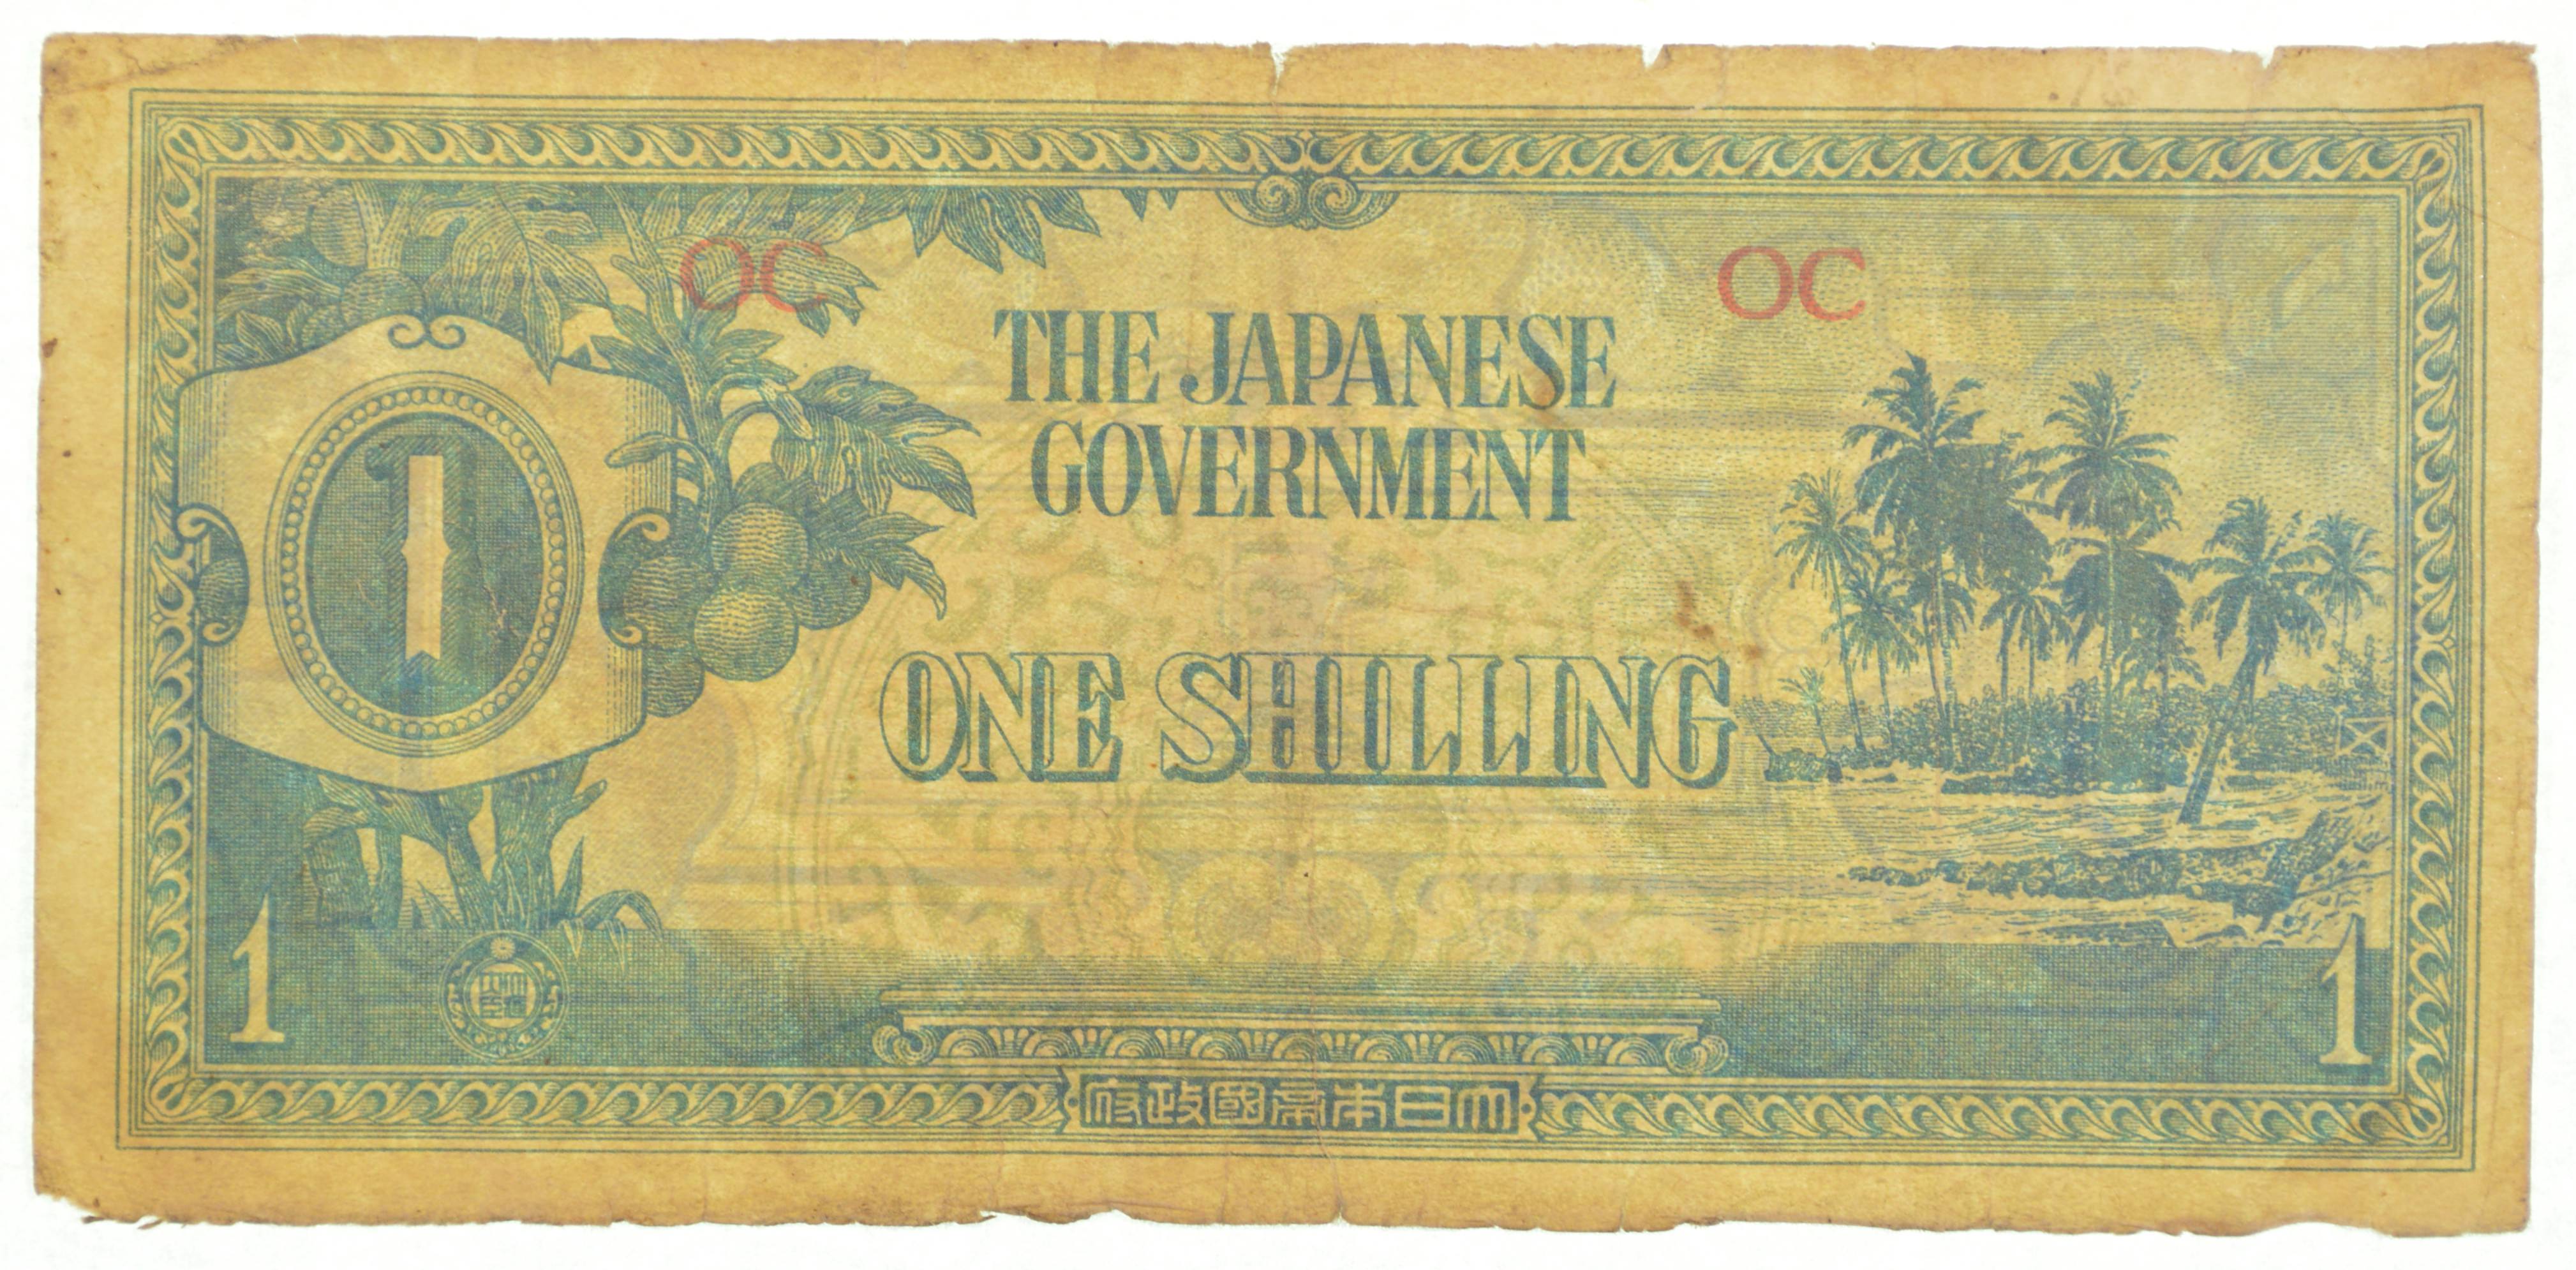 Vintage Japanese Paper Money Currency - Great Note from Japan ...